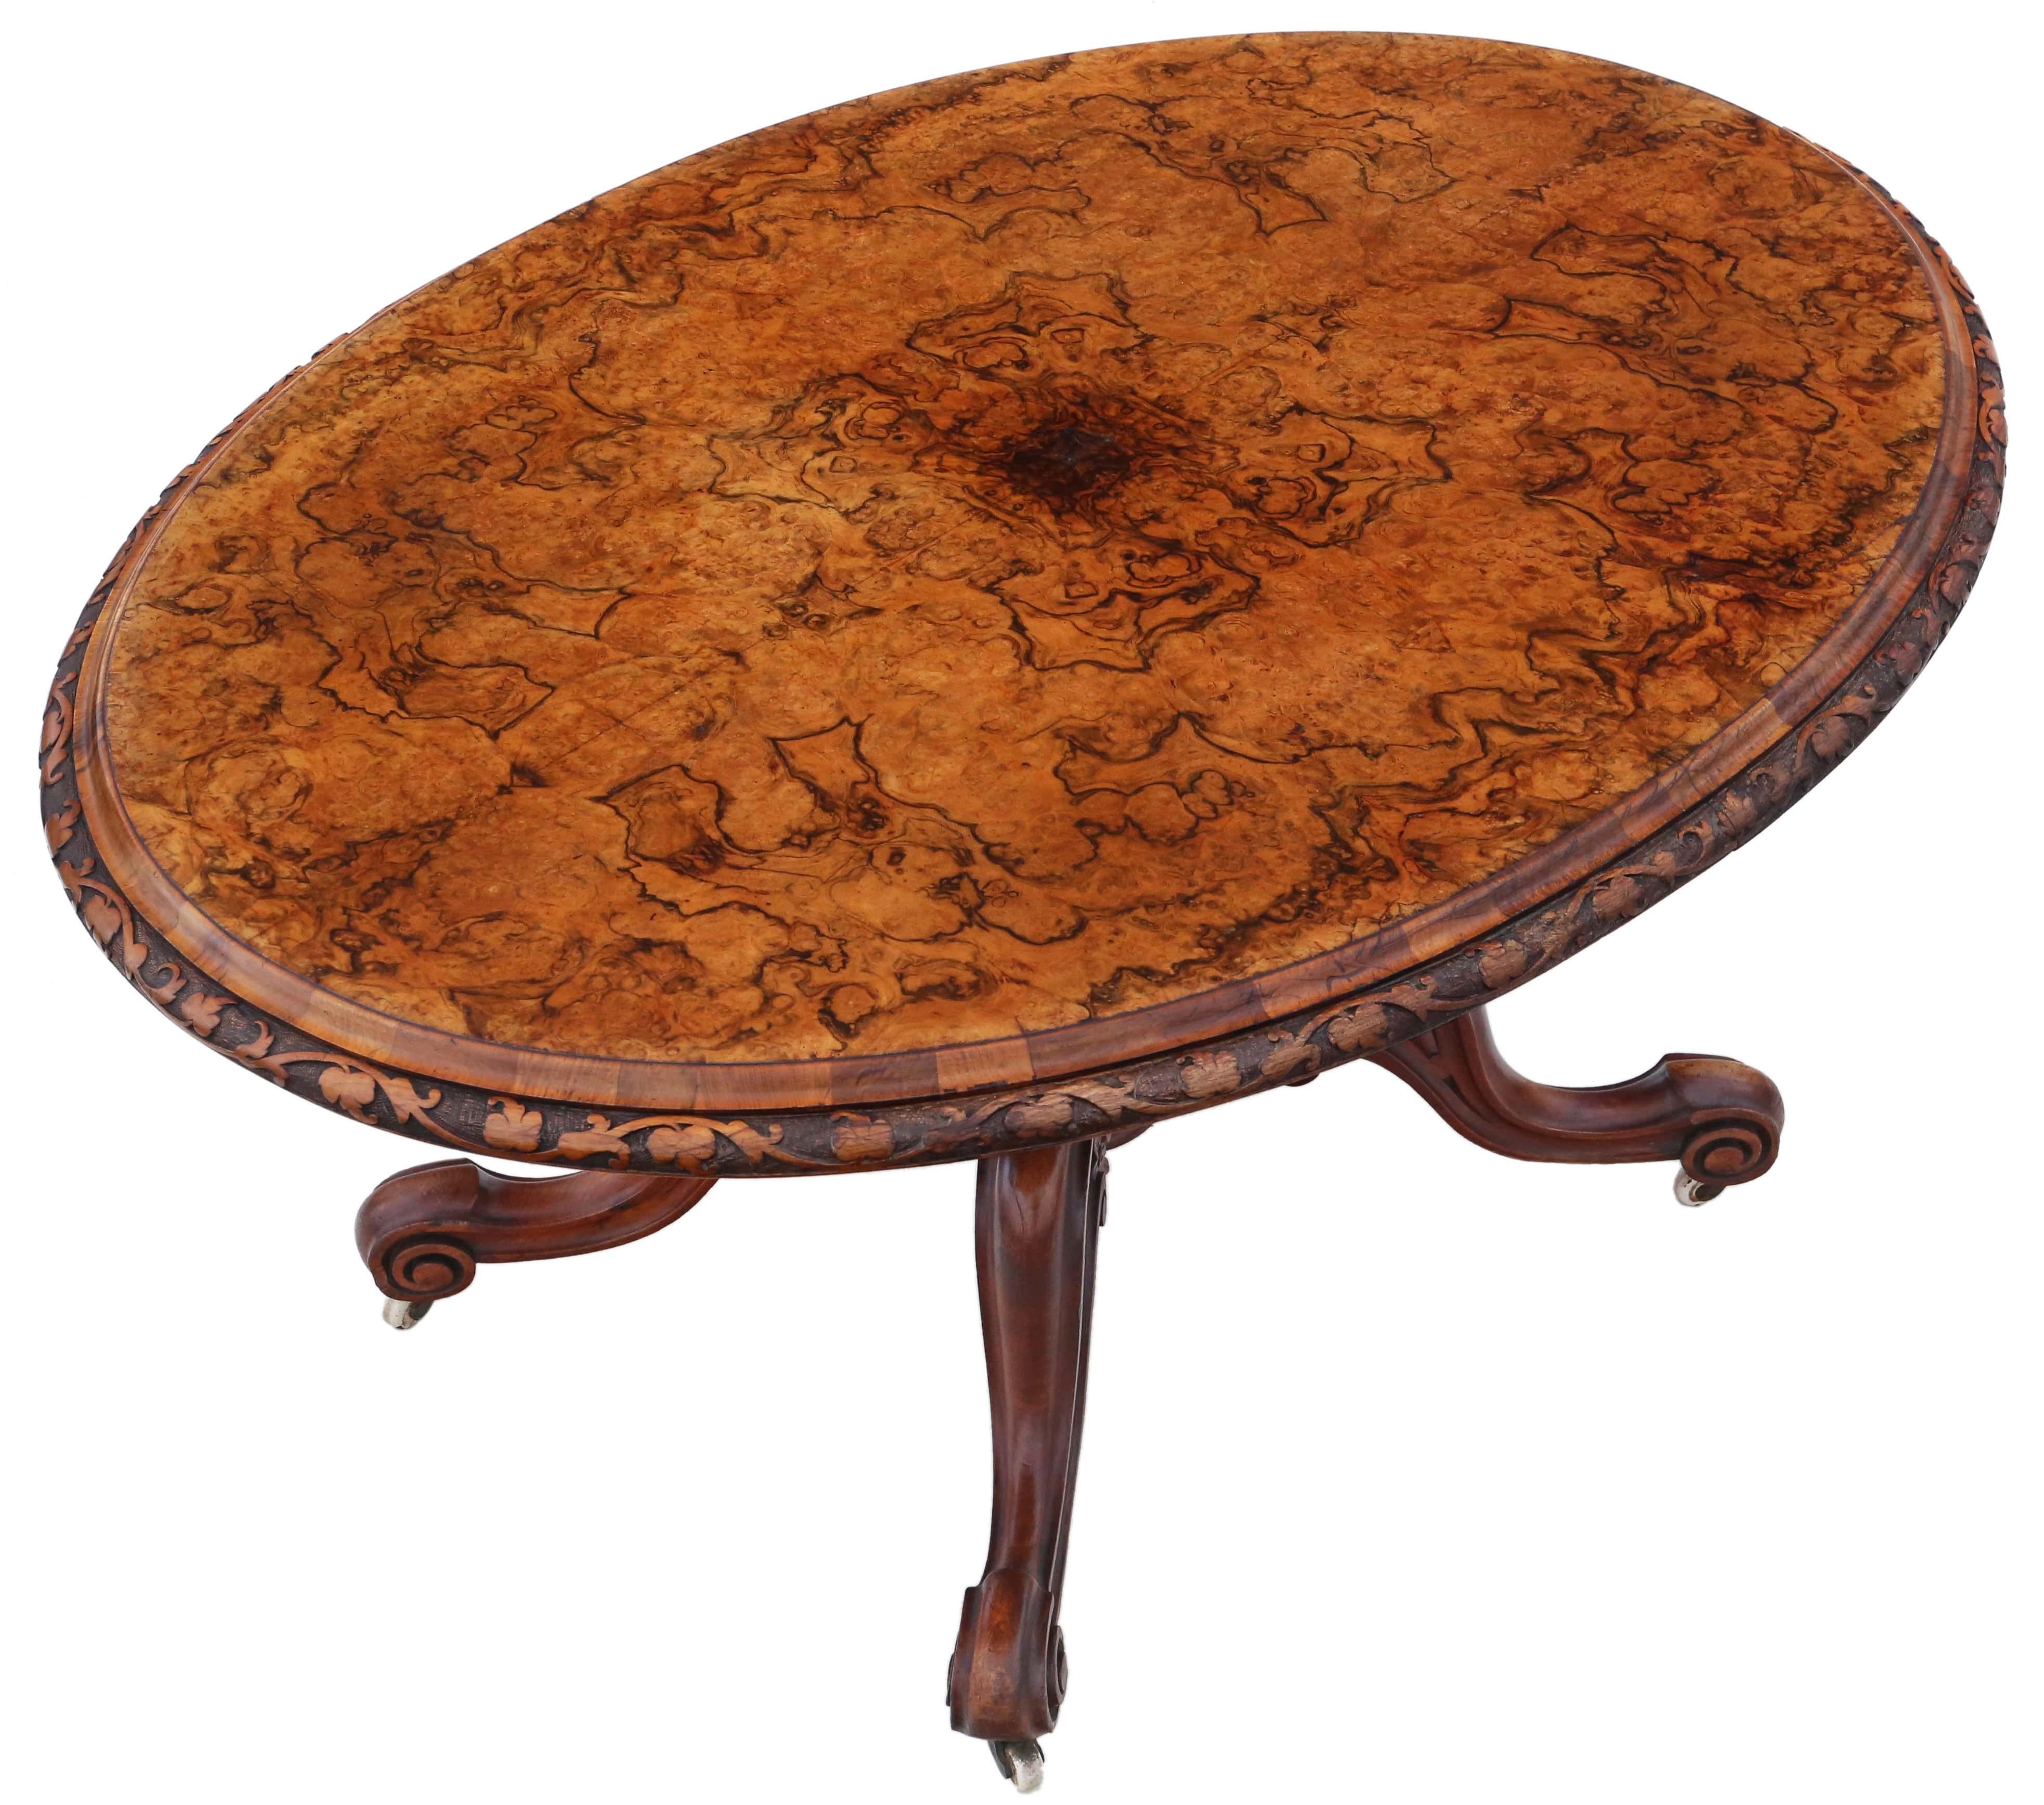 Antique fine quality large Victorian 19th century burr walnut marquetry oval tilt top loo breakfast table.

This is a lovely table (far better than most), that is full of age, charm and character. Great colour and best patina.

Rare and